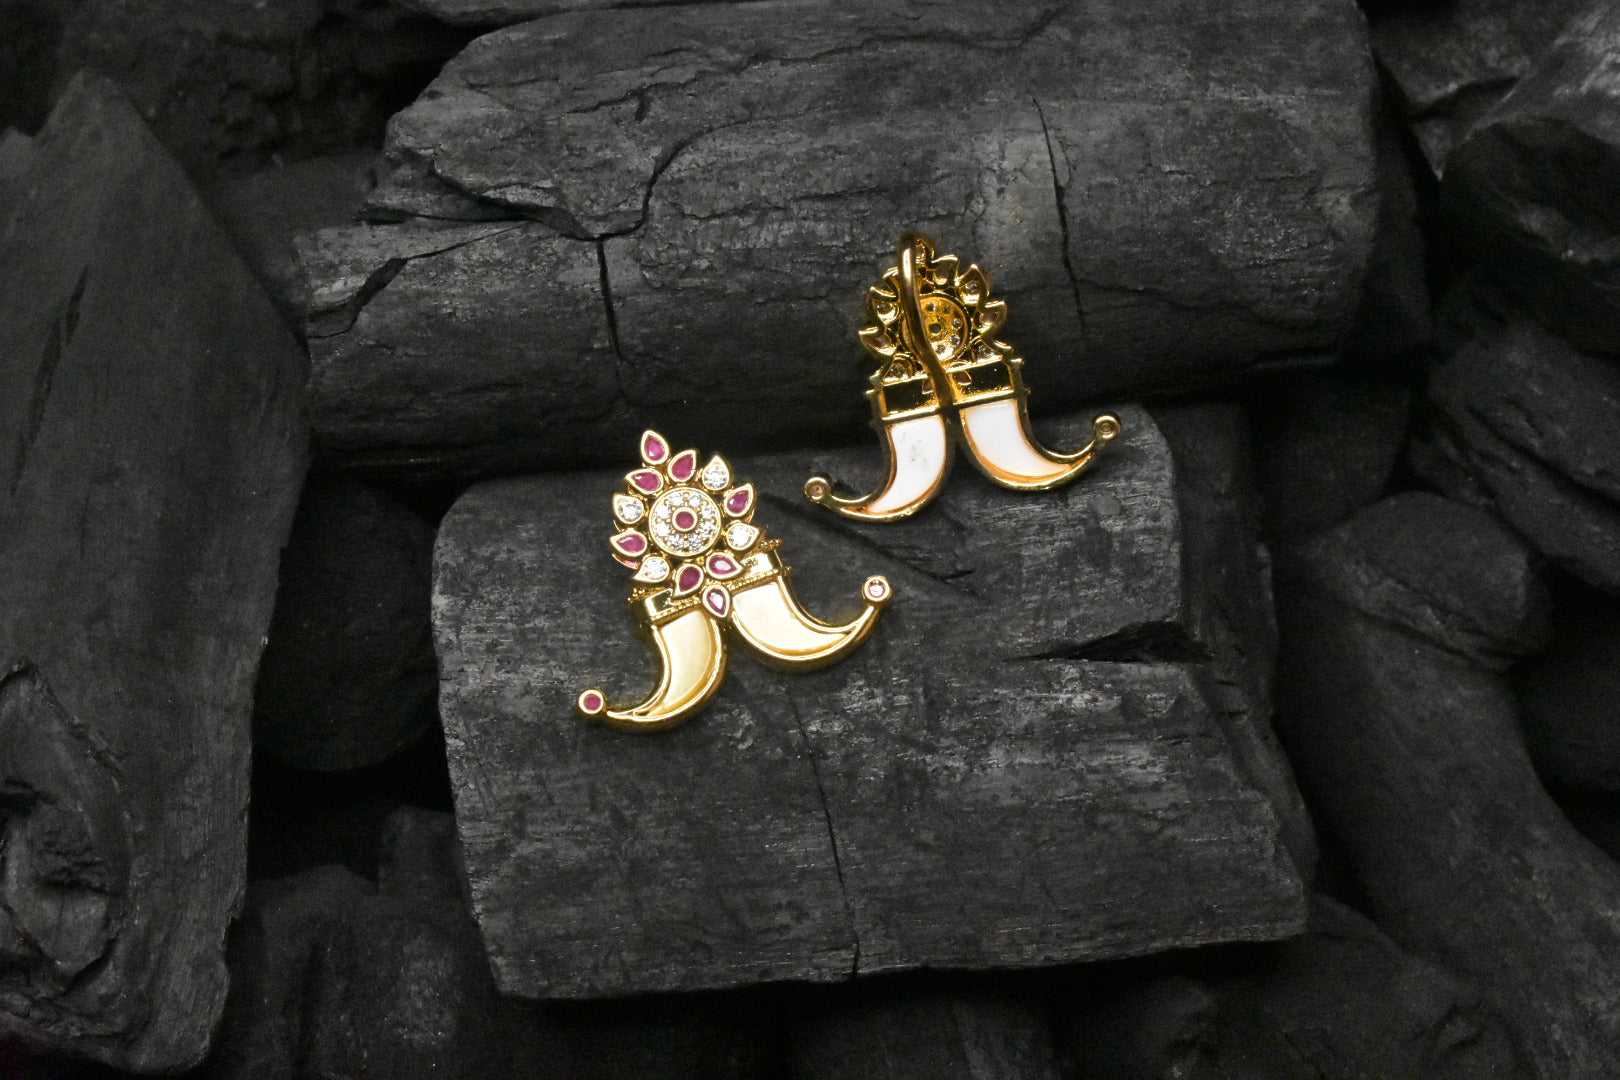 Gold-Plated Traditional Earrings with Stone Embellishments